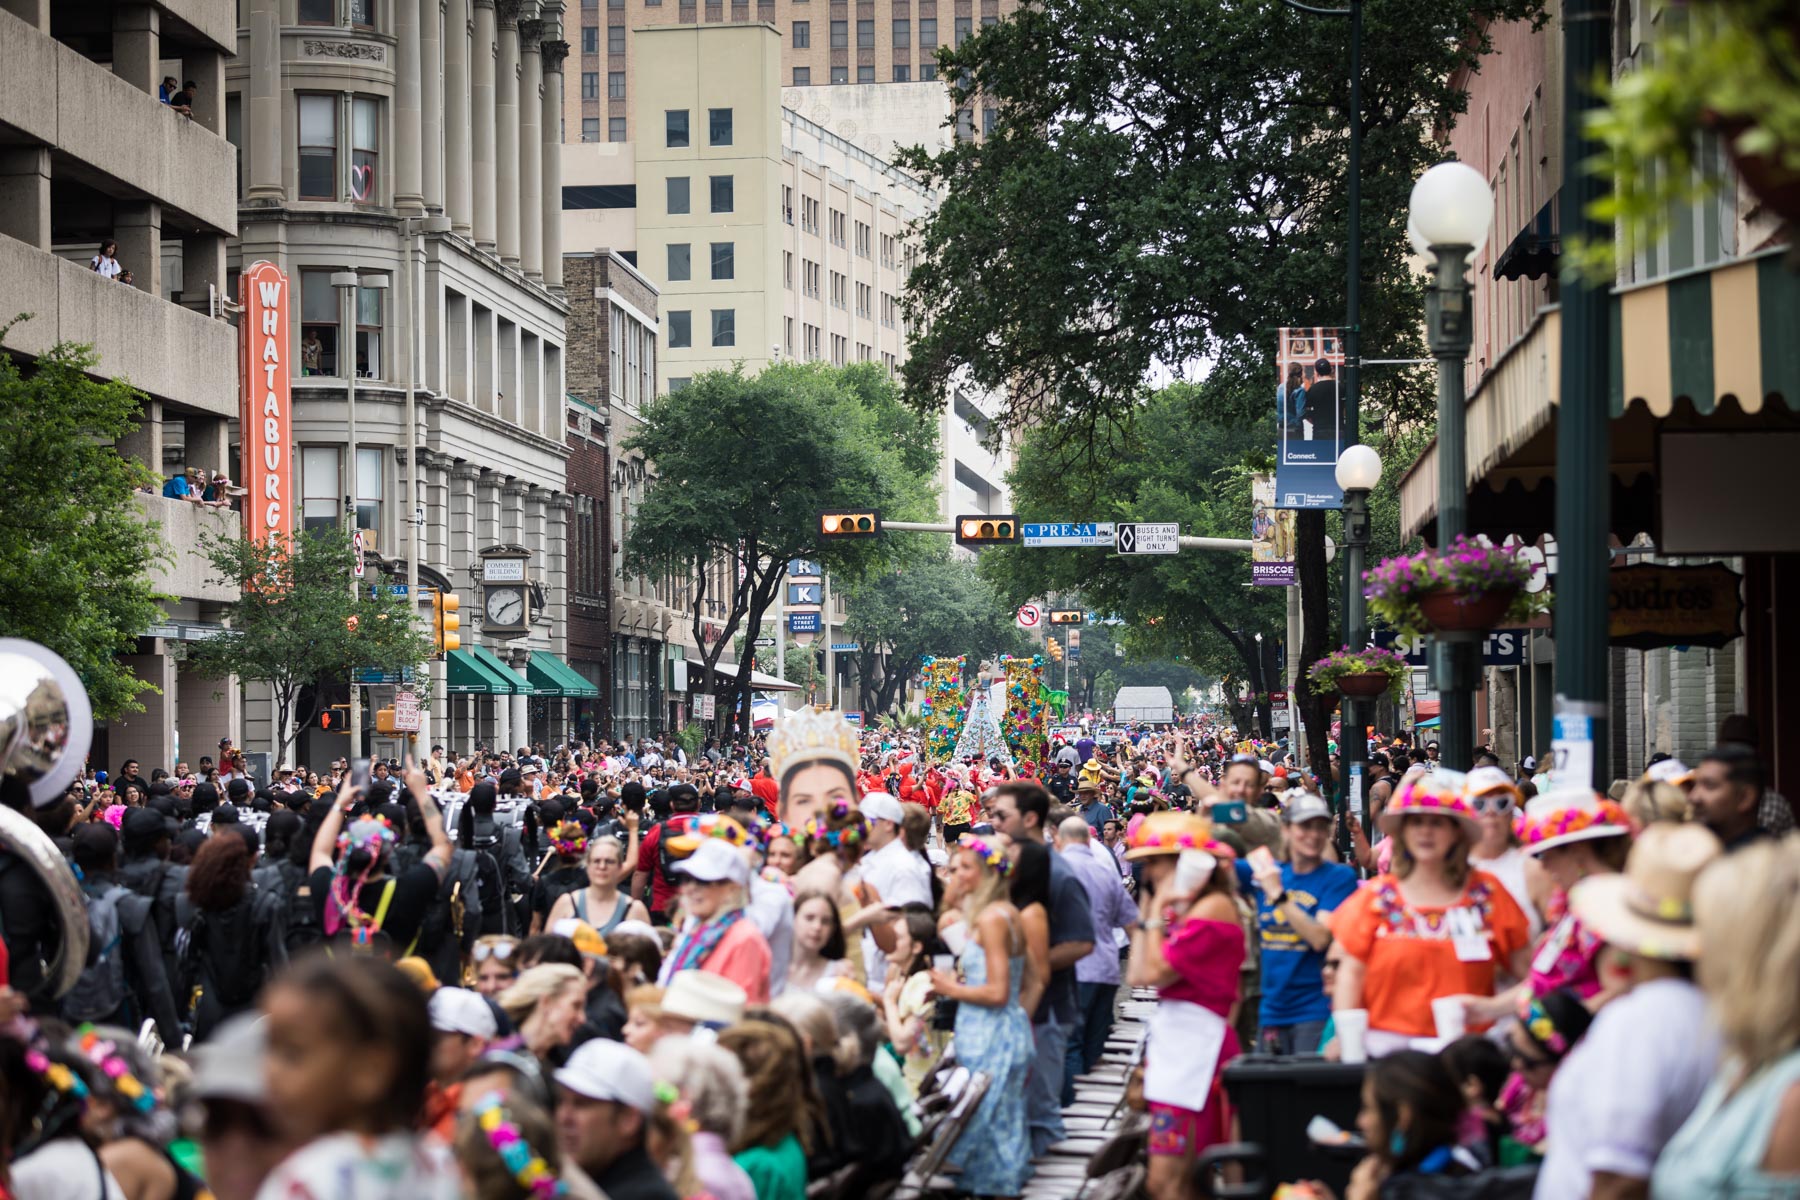 Huge crowds in San Antonio during Battle of Flowers parade for an article on the best Fiesta photos